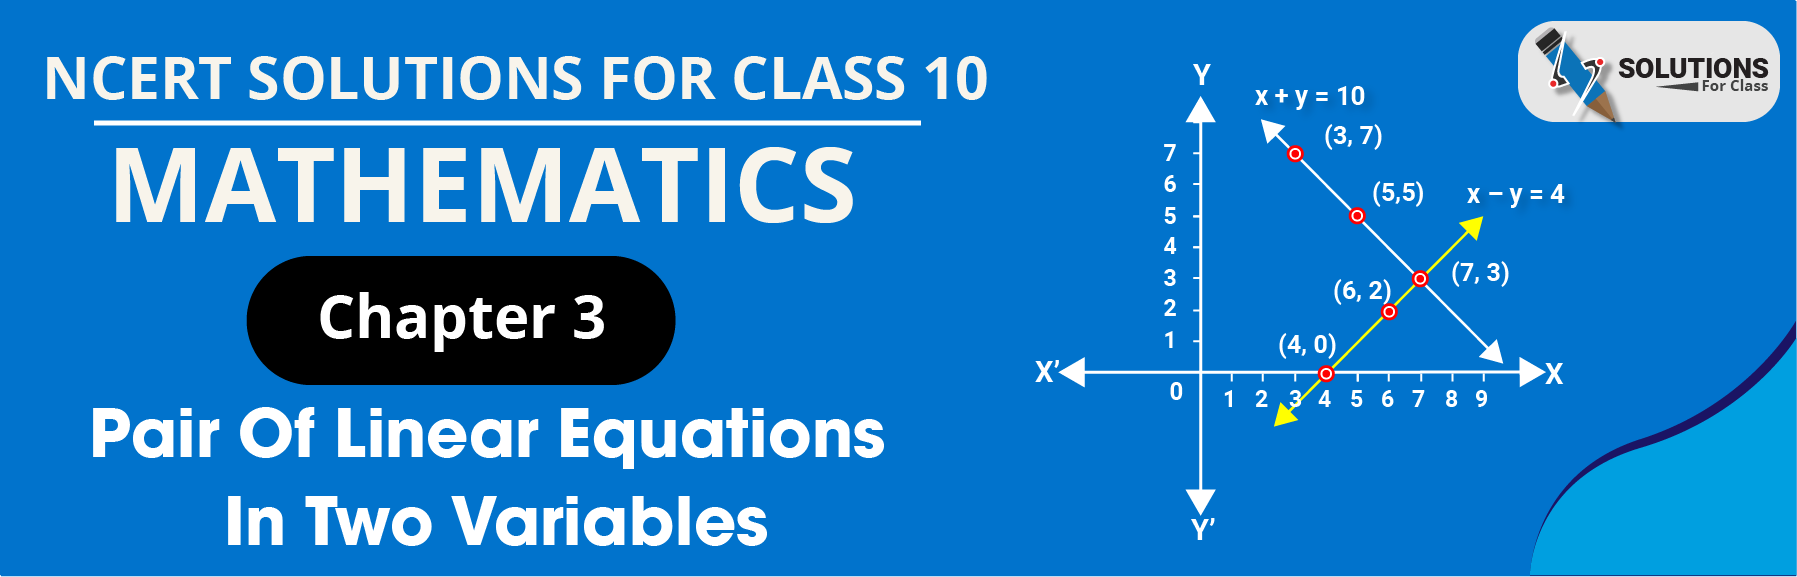 NCERT Solution For Class 10, Maths, Pair Of Linear Equations In Two Variables